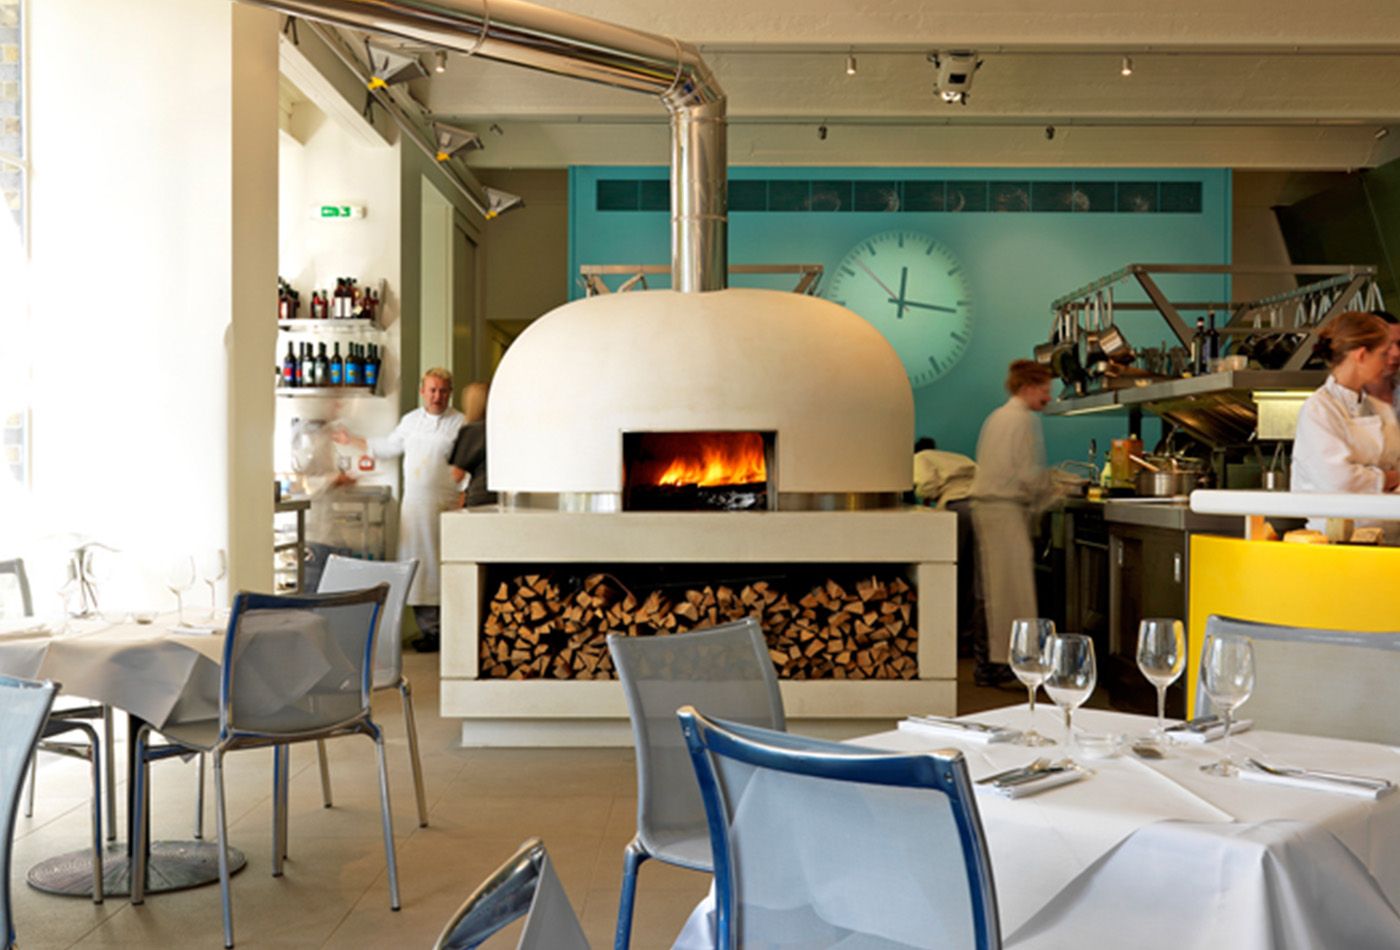 Large white pizza oven with a projected clock-face onto a turquoise wall